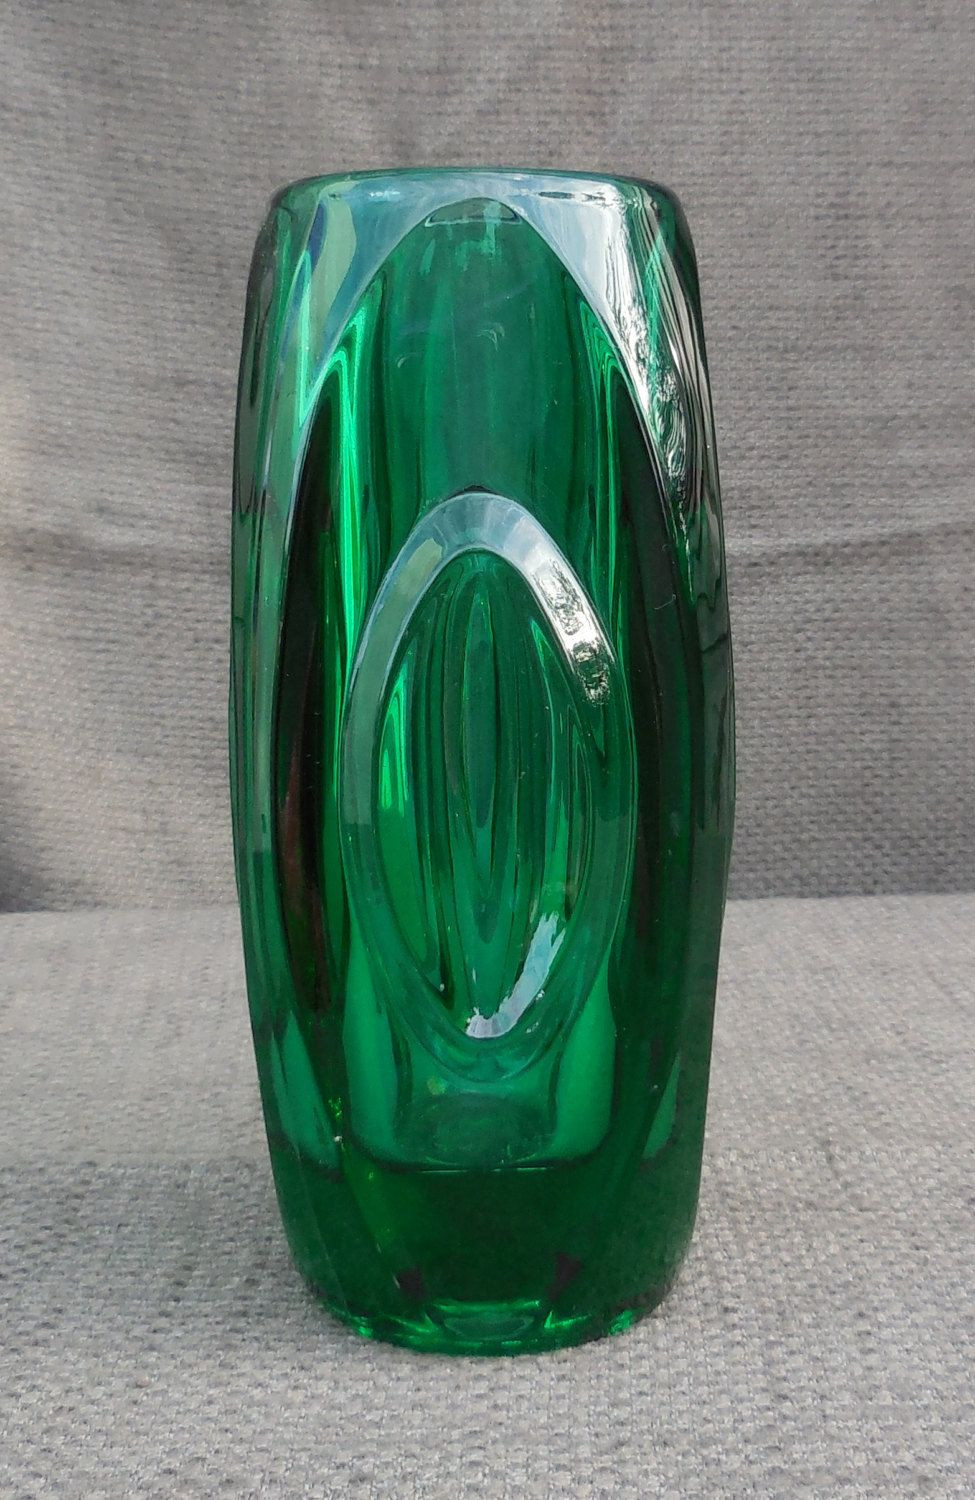 12 Elegant Cut Glass Vase Value 2023 free download cut glass vase value of stunning 1950s vintage rosice czech lens green art glass vase by within stunning 1950s vintage rosice czech lens green art glass vase by rudolph schrotter